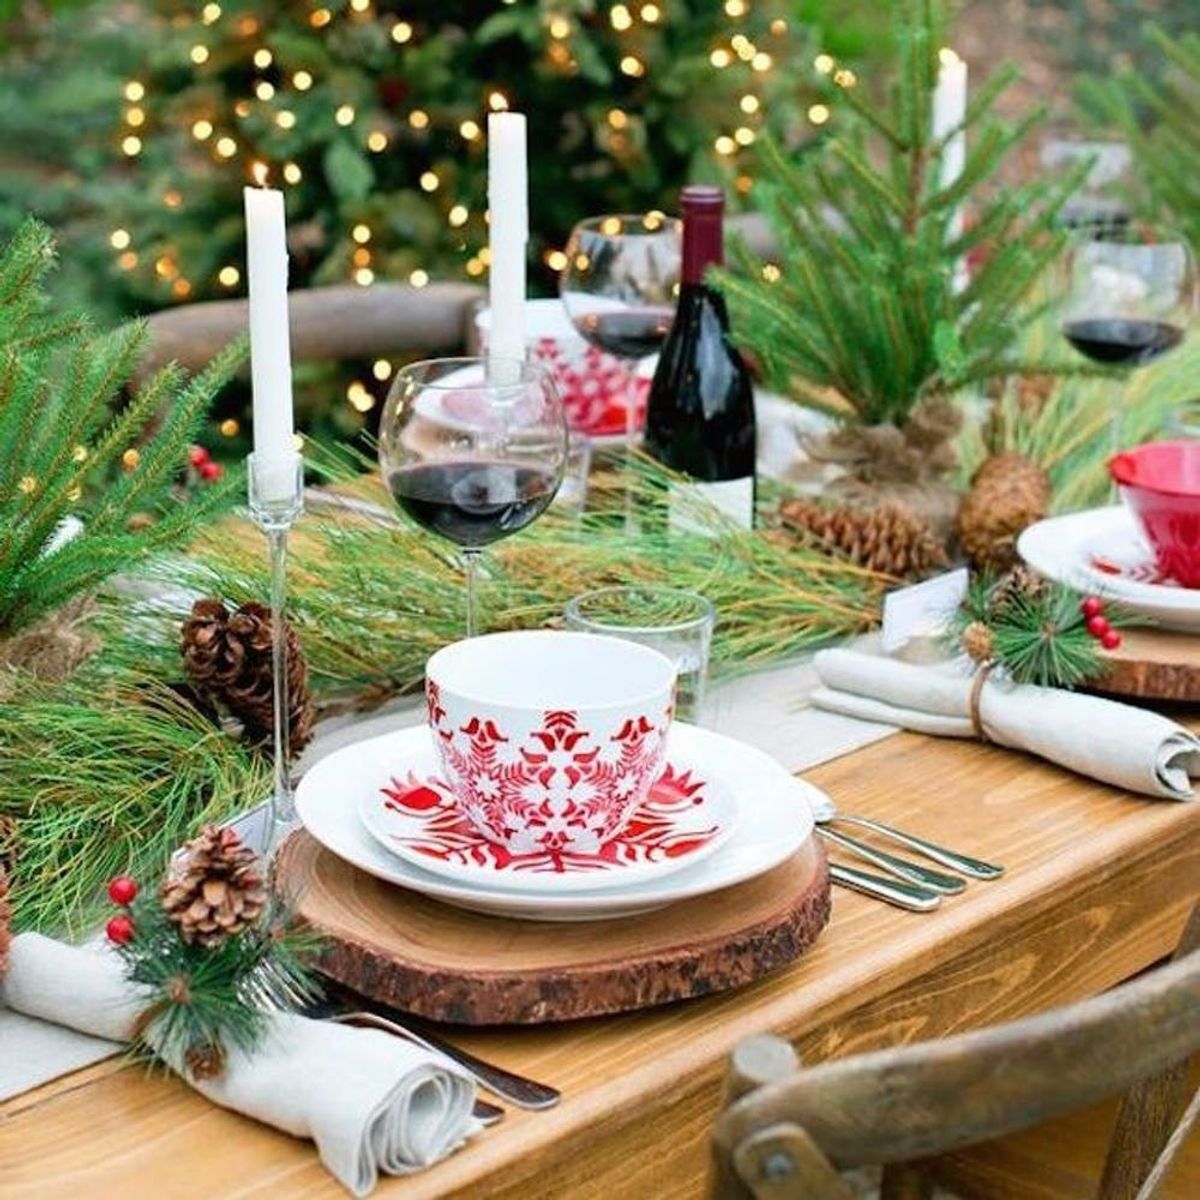 11 Festive Tablescapes Inspired by Nature